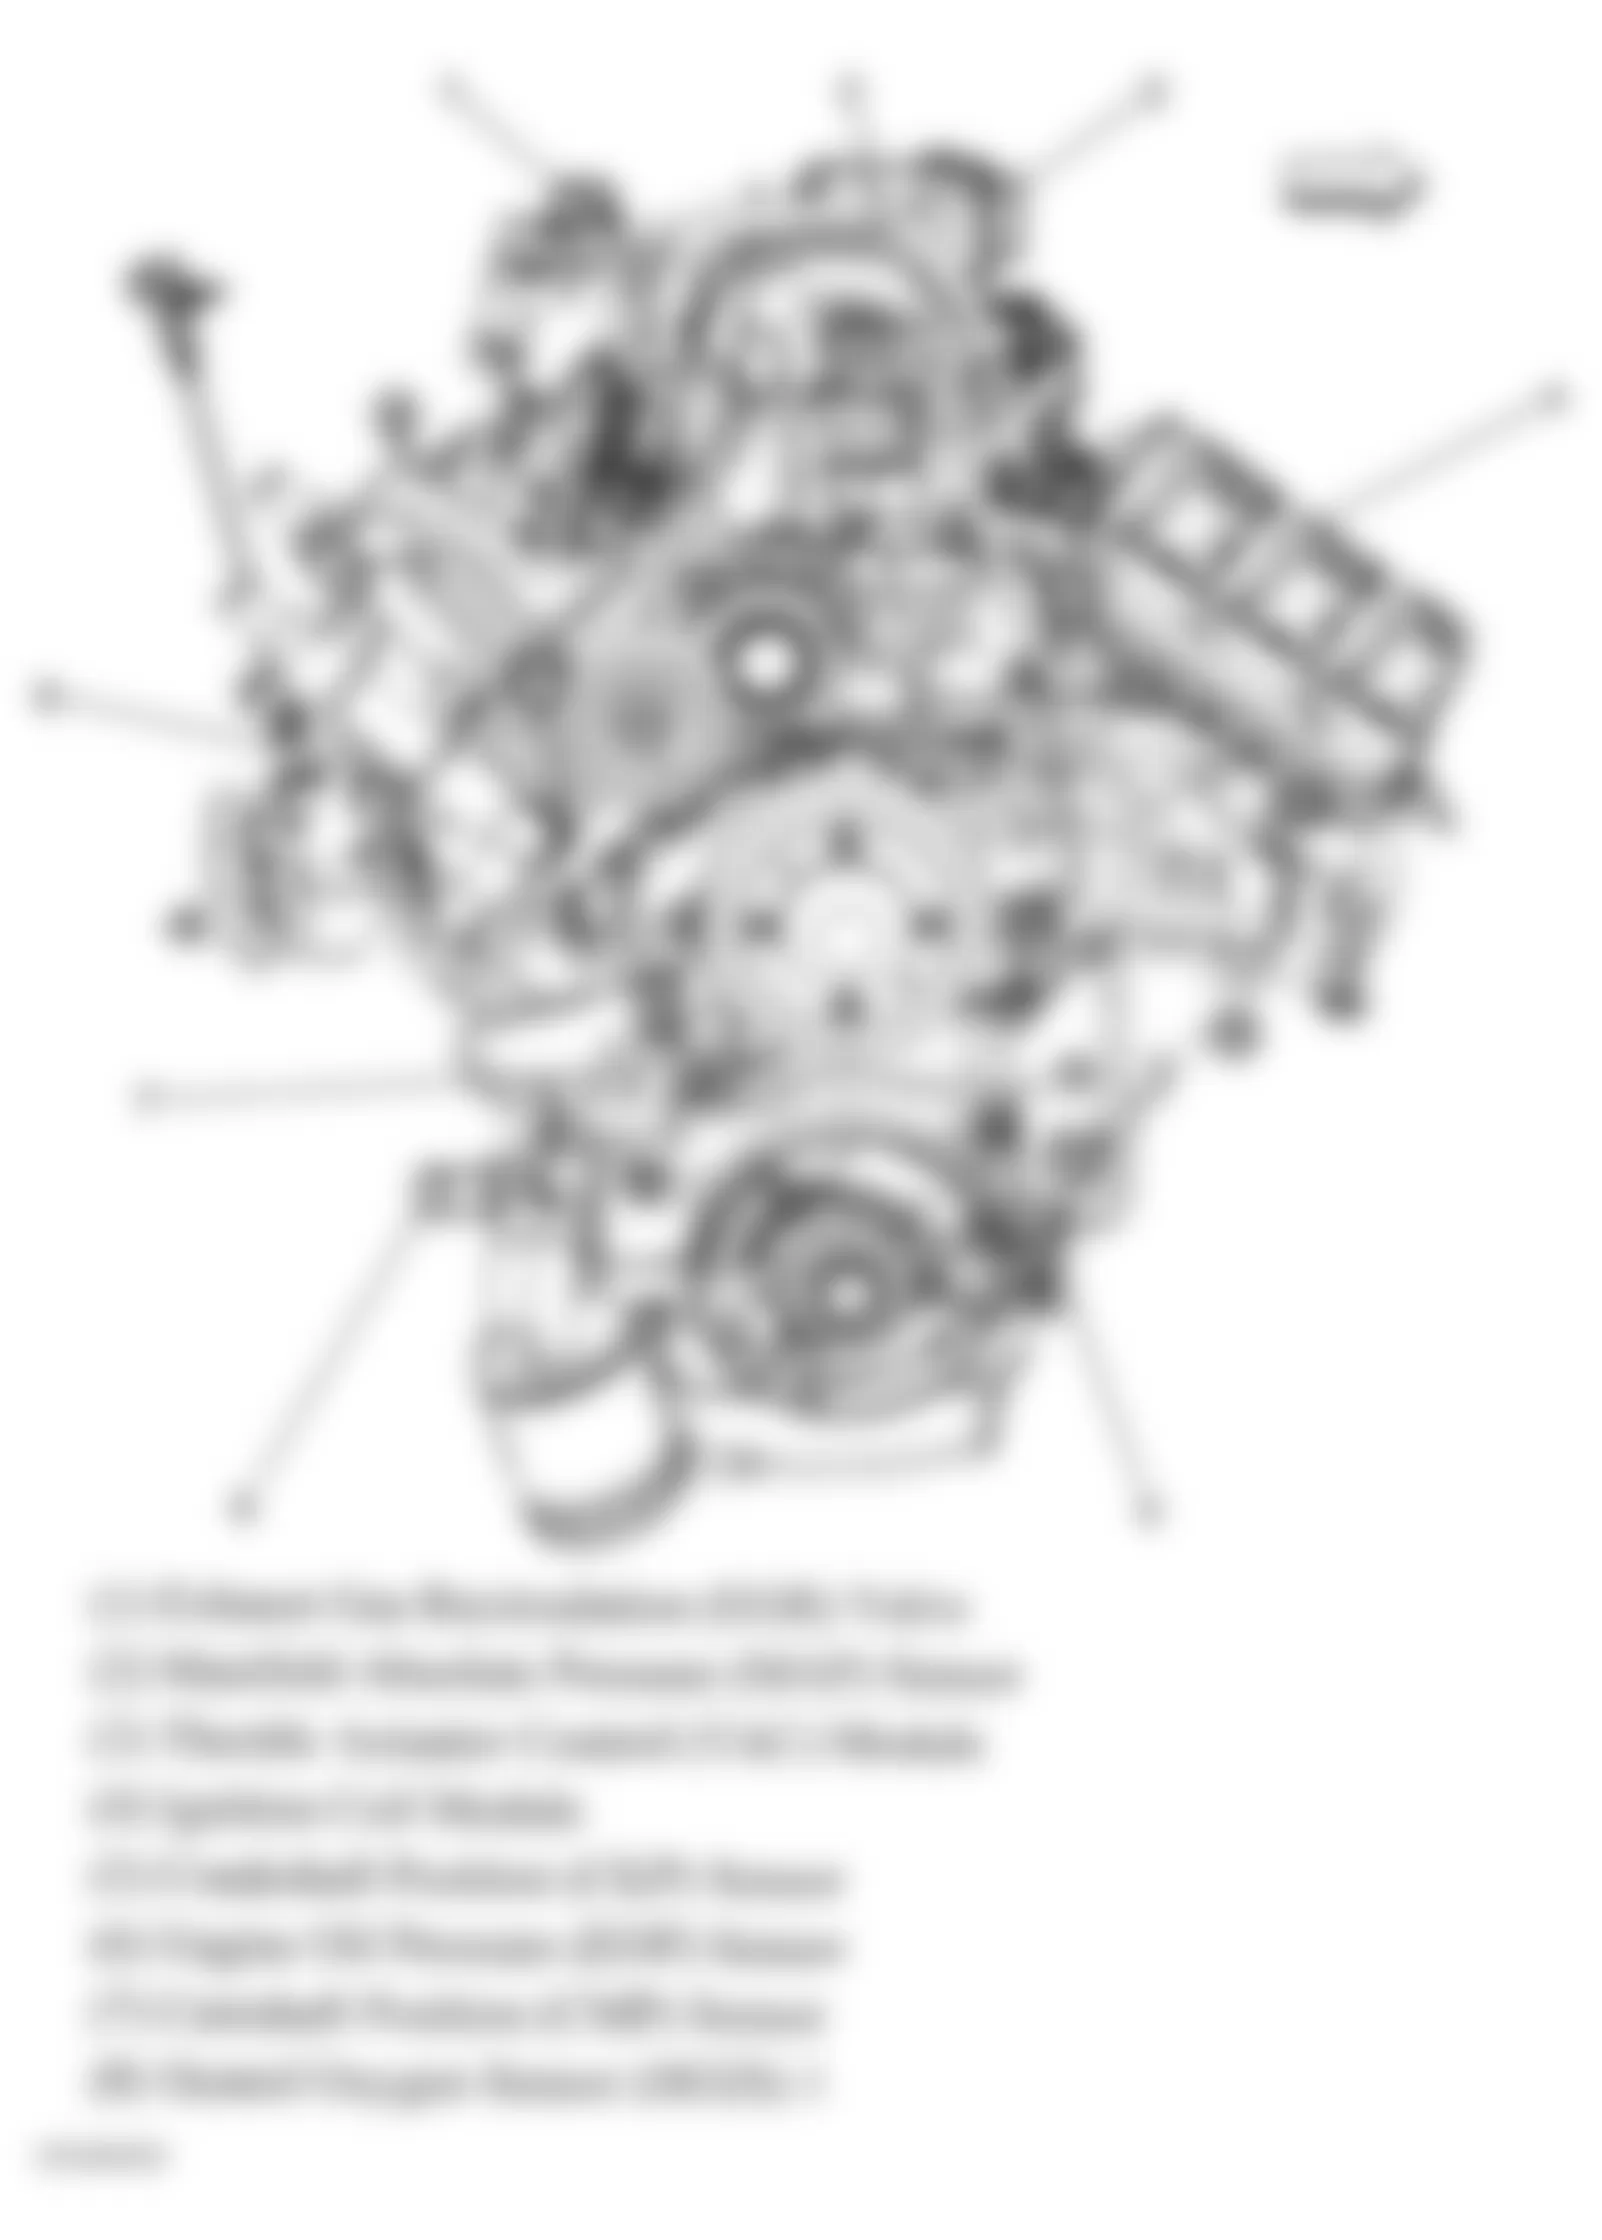 Buick LaCrosse CXL 2005 - Component Locations -  Front Of Engine (3.8L)